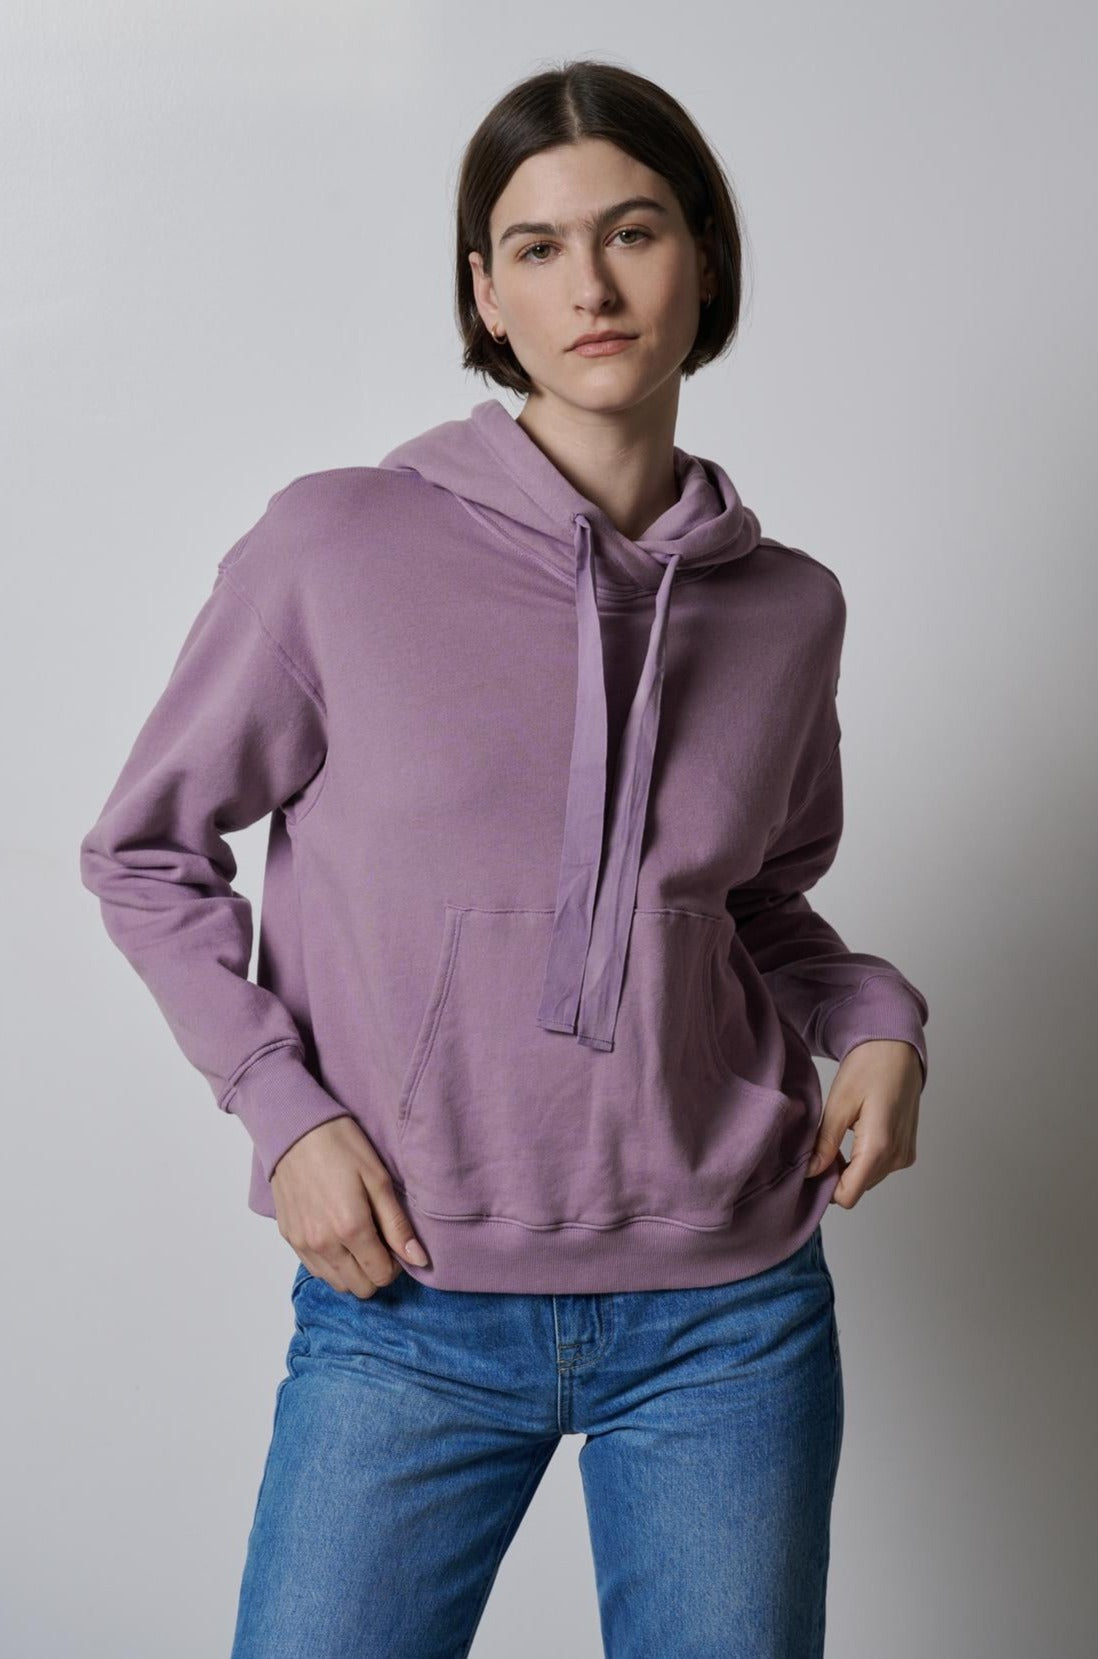 A model wearing a OJAI HOODIE by Velvet by Jenny Graham and jeans.-35783045415105